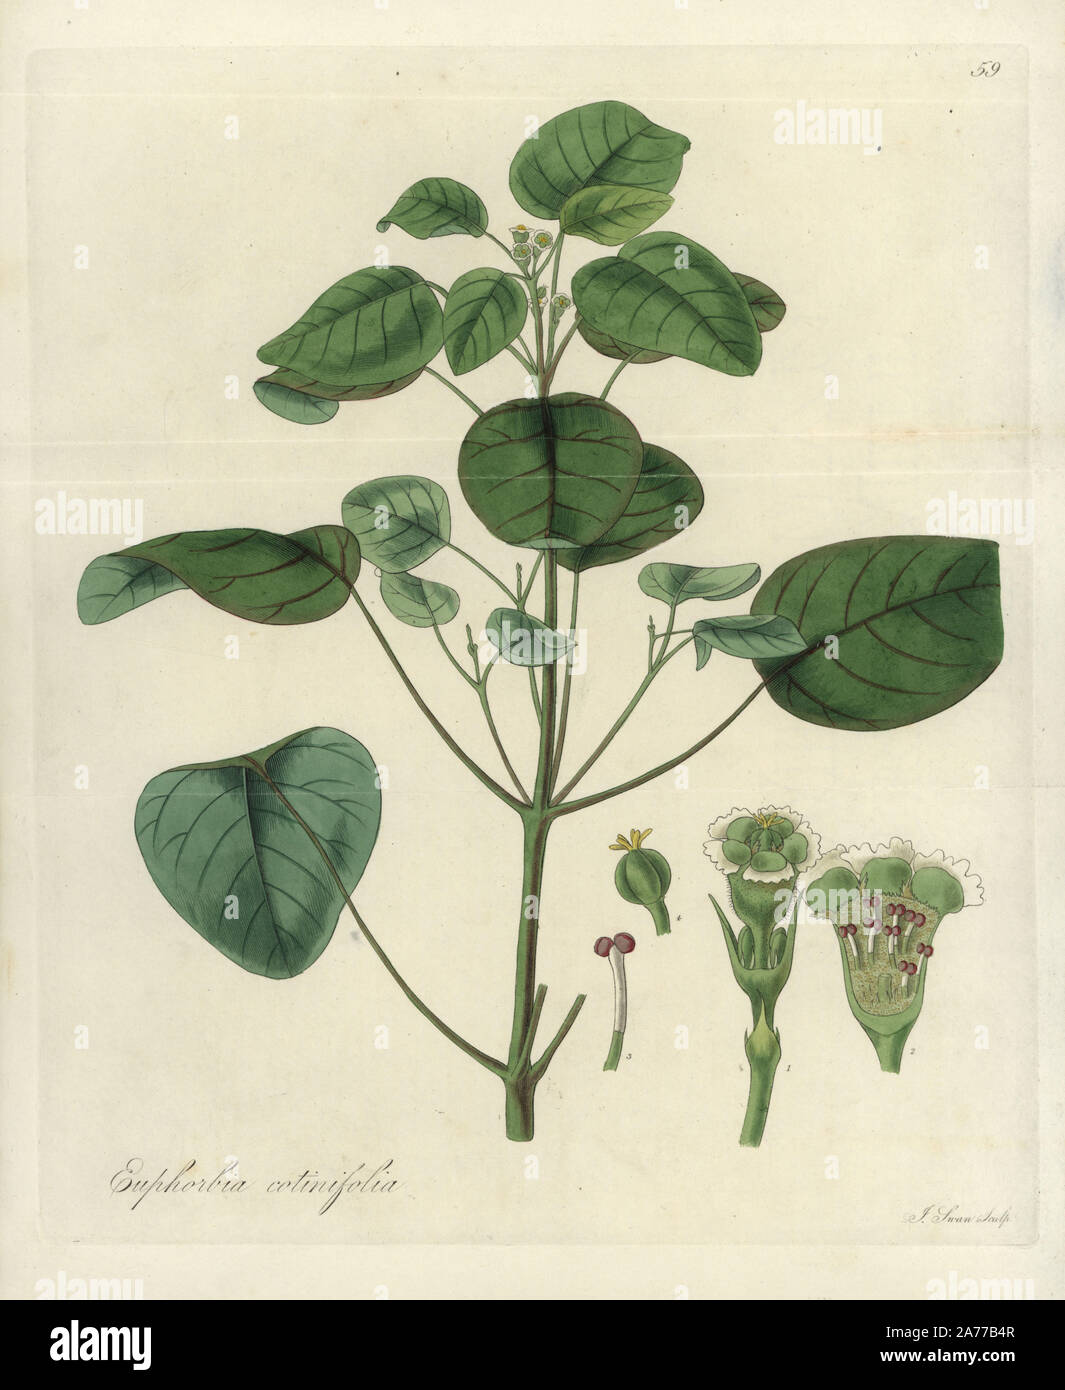 Smoketree spurge or shumac-leaved spurge, Euphorbia cotinifolia. Handcoloured copperplate engraving by J. Swan after a botanical illustration by William Jackson Hooker from his own 'Exotic Flora,' Blackwood, Edinburgh, 1823. Hooker (1785-1865) was an English botanist who specialized in orchids and ferns, and was director of the Royal Botanical Gardens at Kew from 1841. Stock Photo